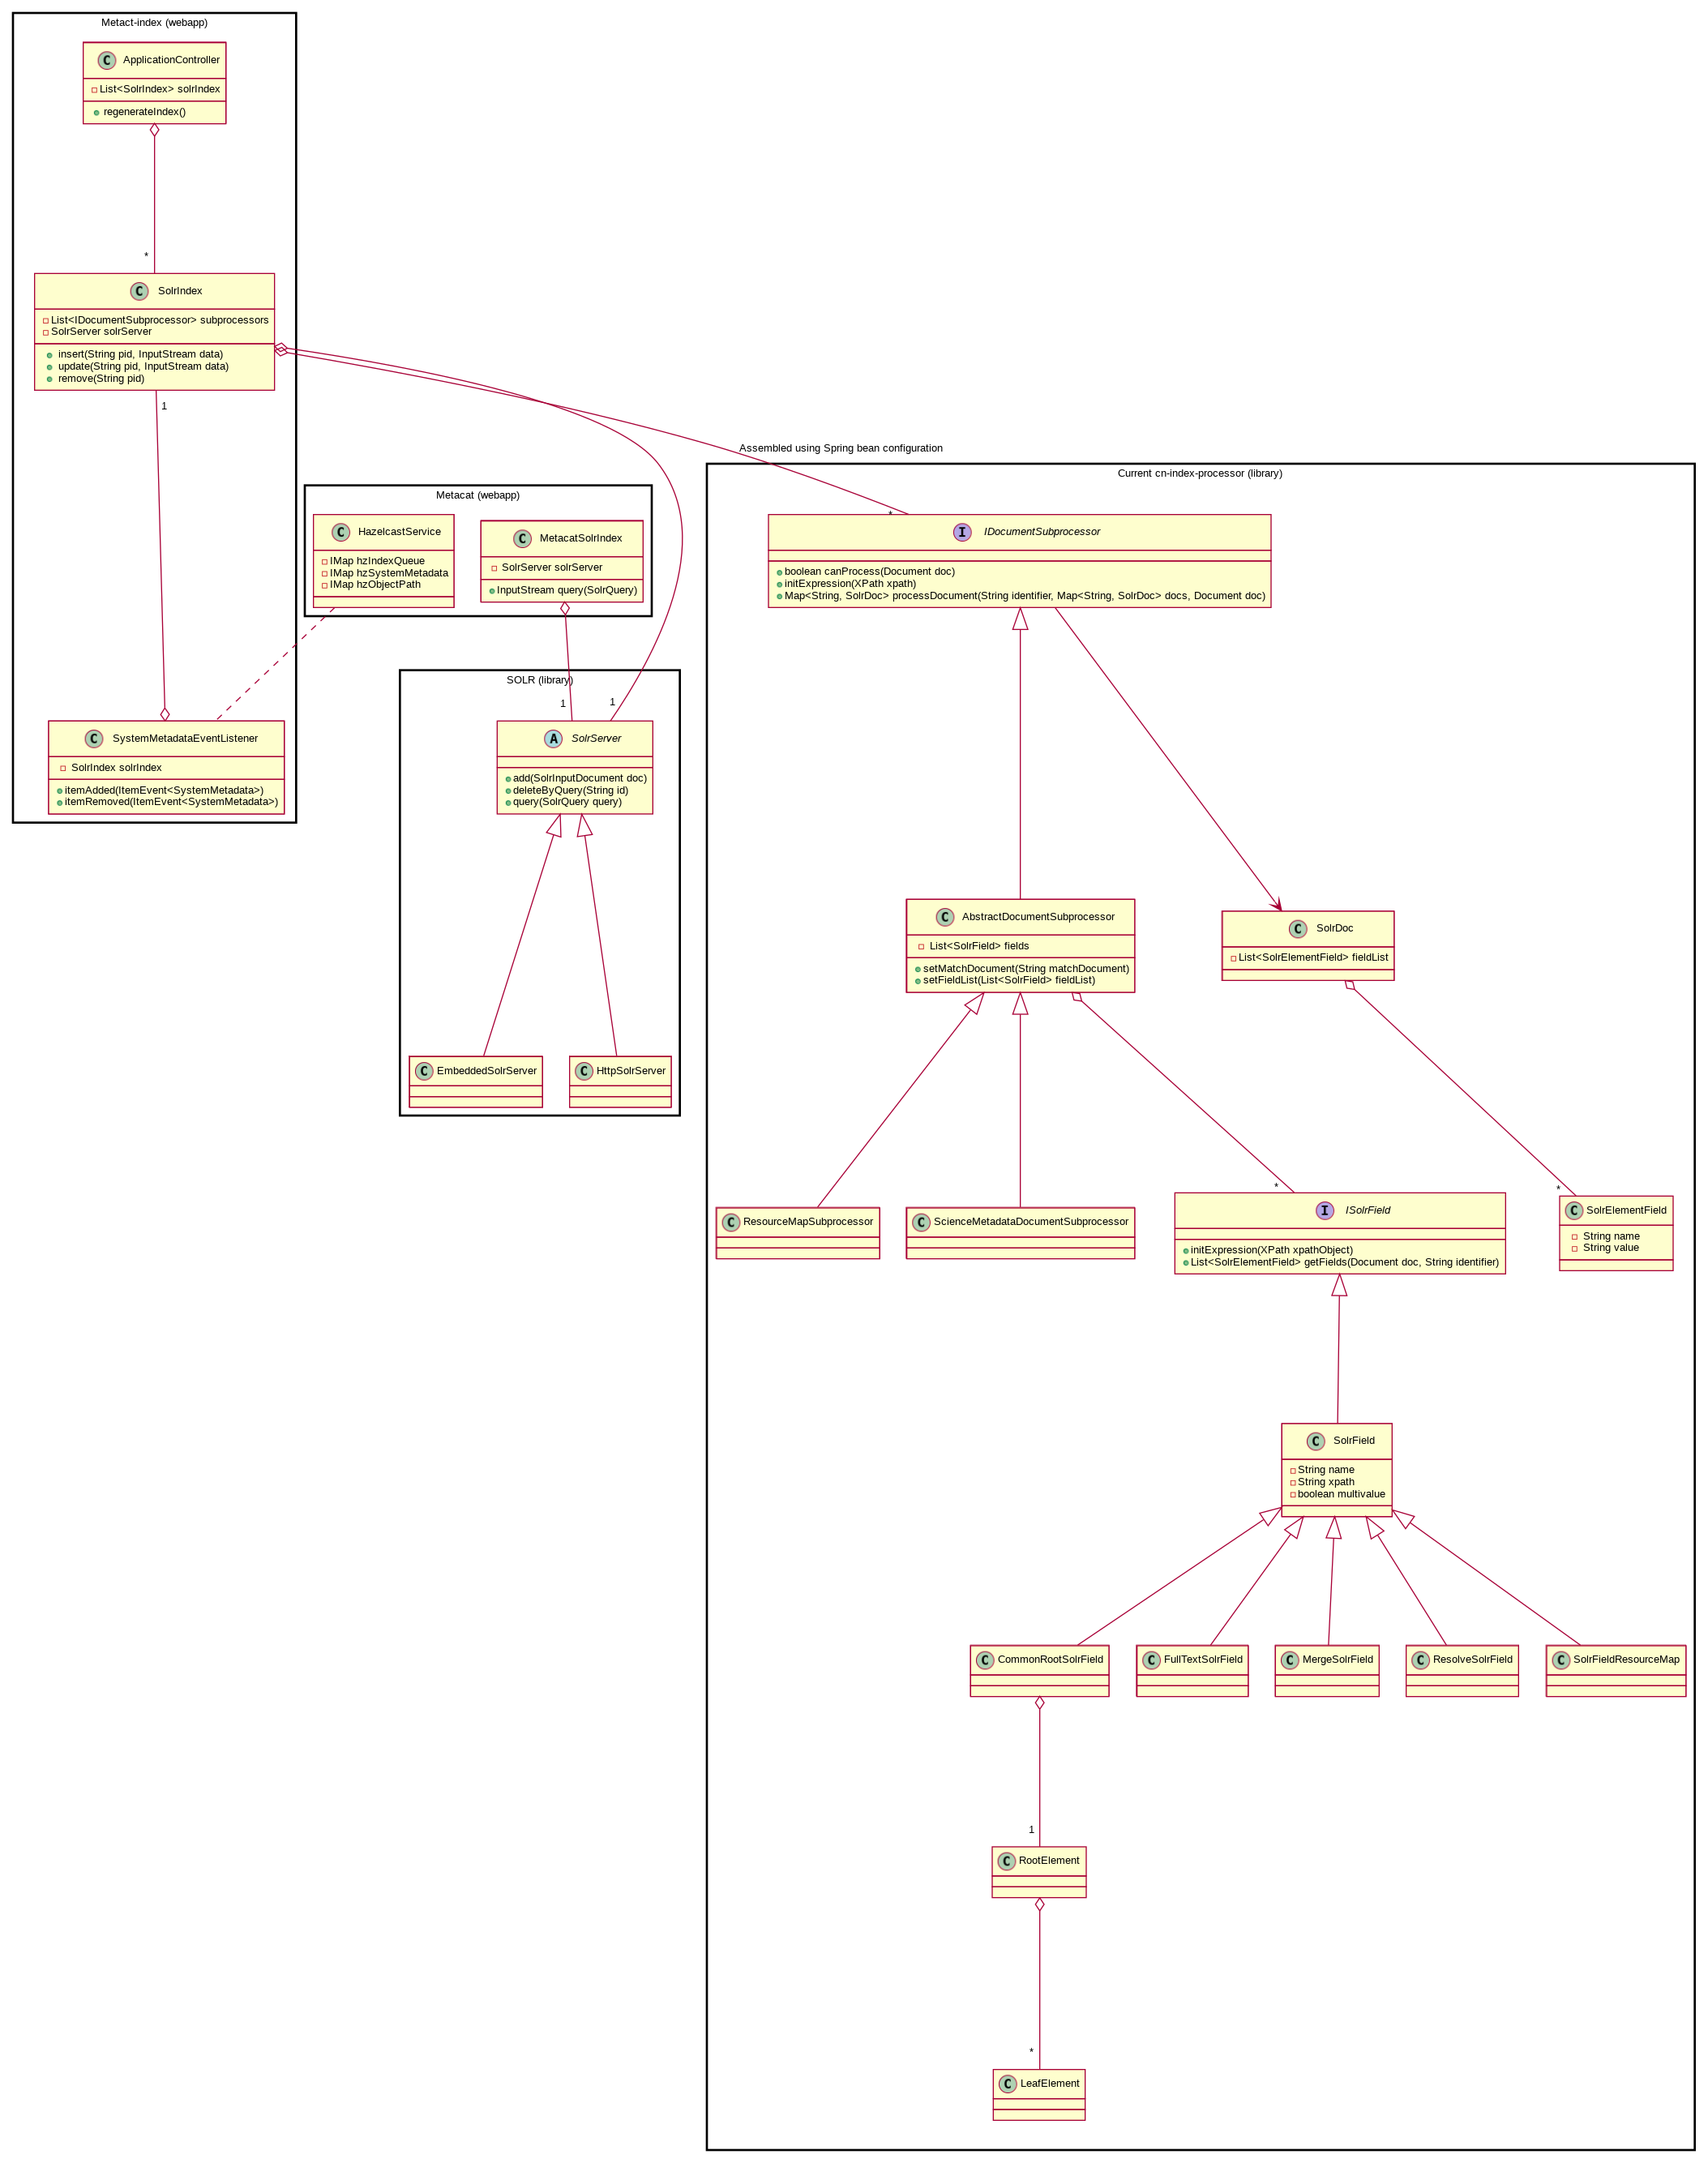 _images/indexing-class-diagram.png